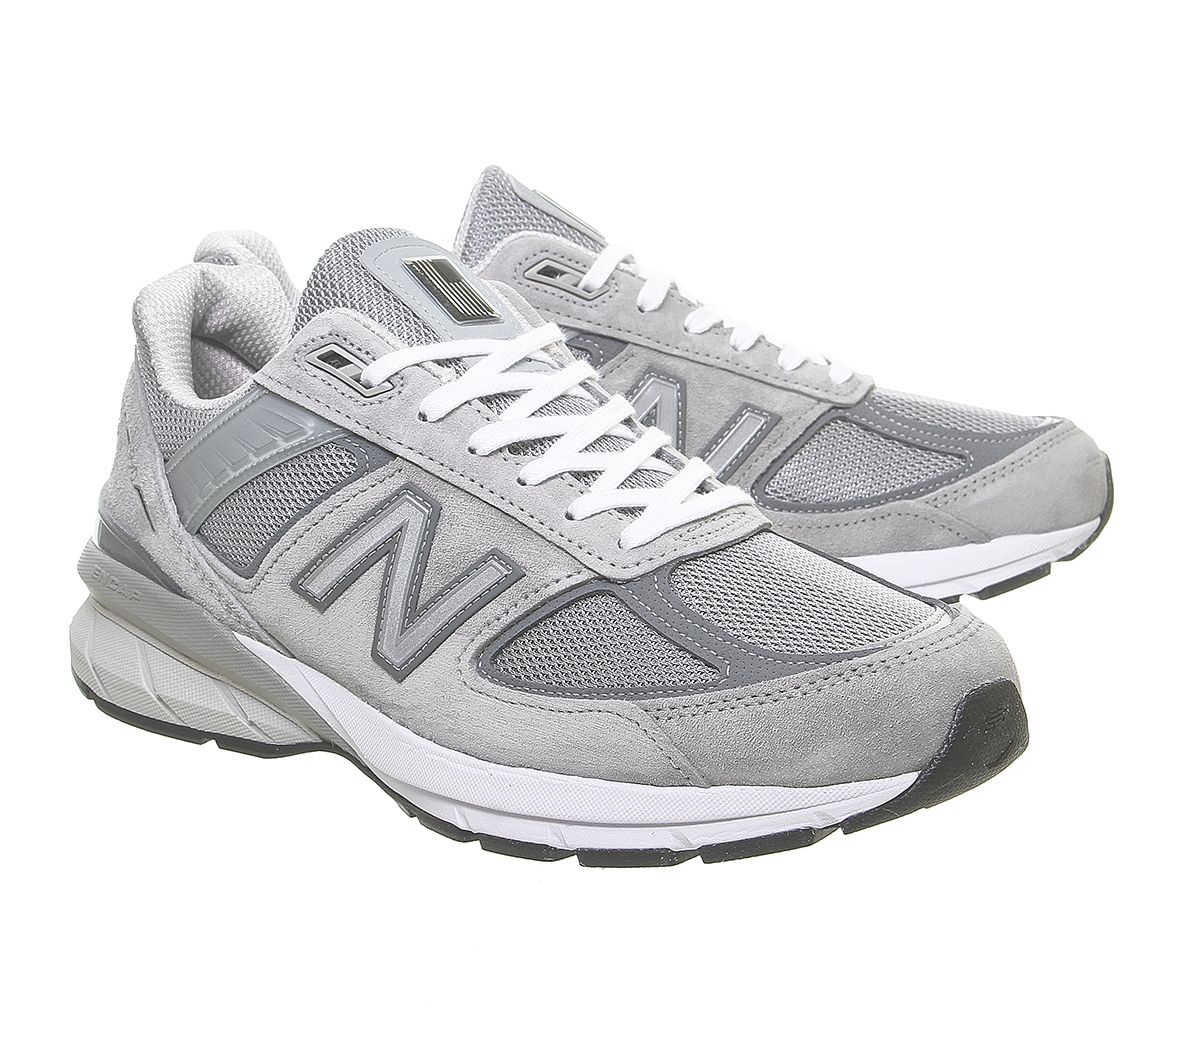 New Balance 990 Trainers Grey - His trainers